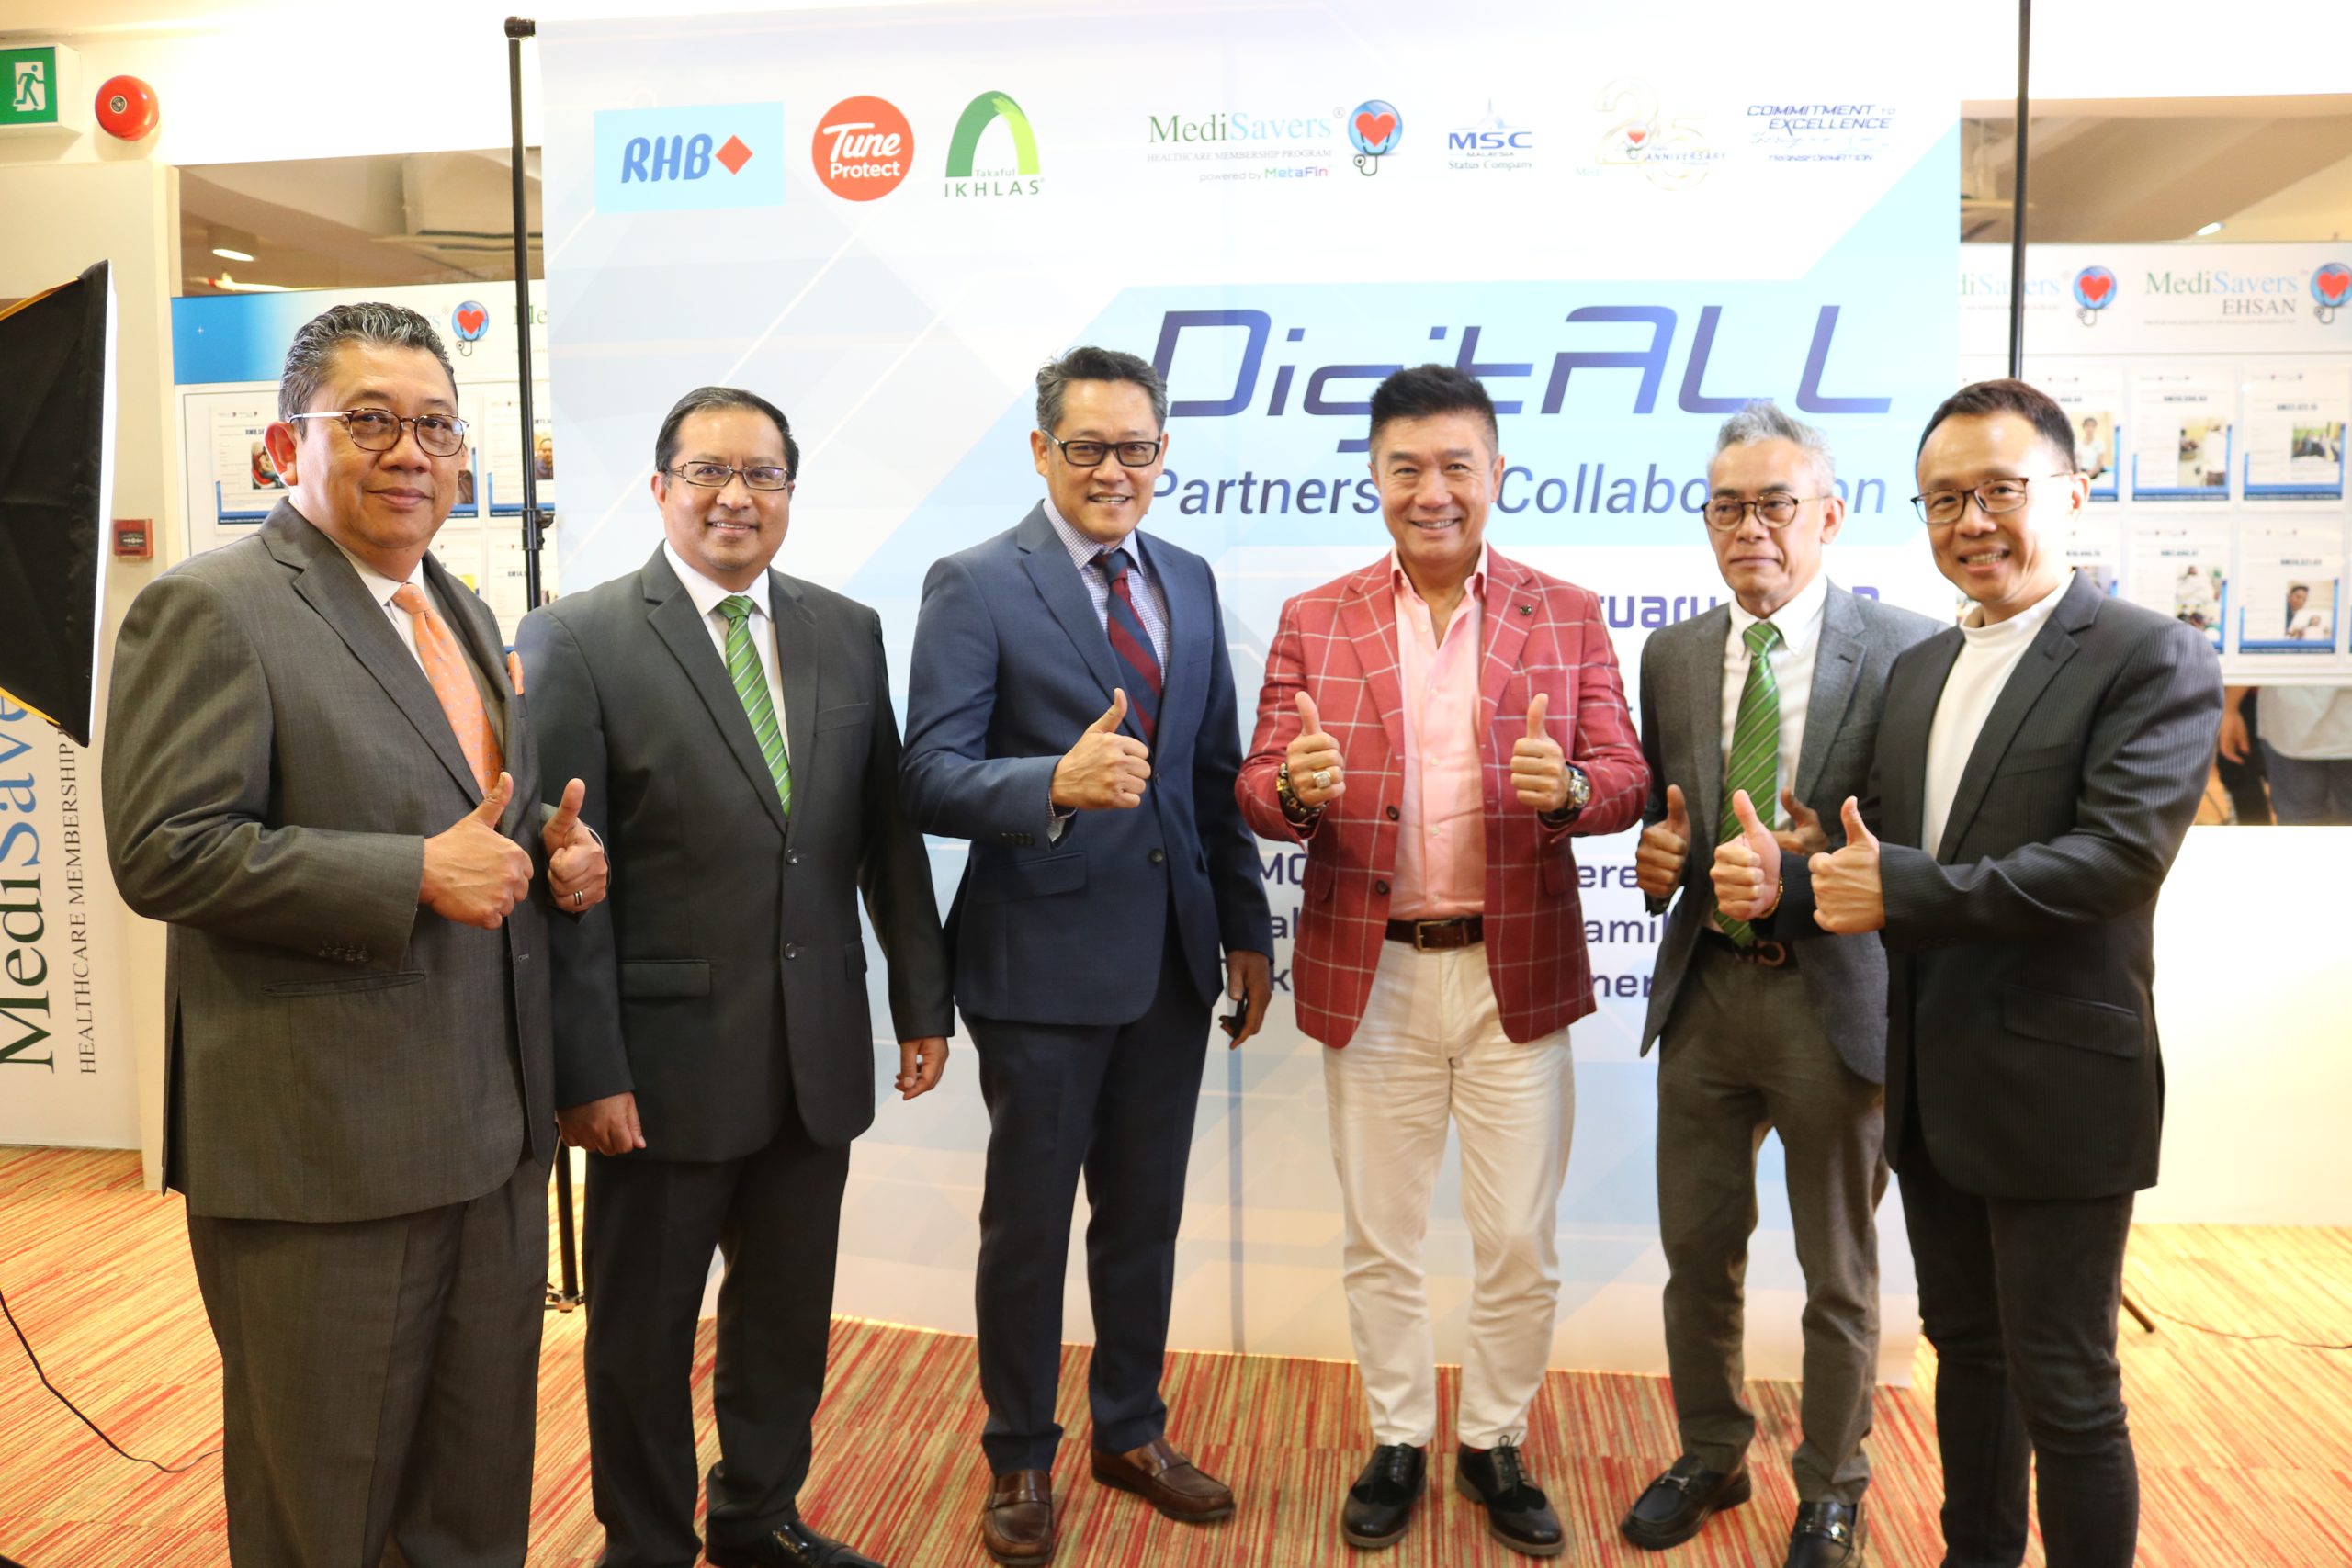 DigitALL Product Launch and MoU Signing Ceremony Event